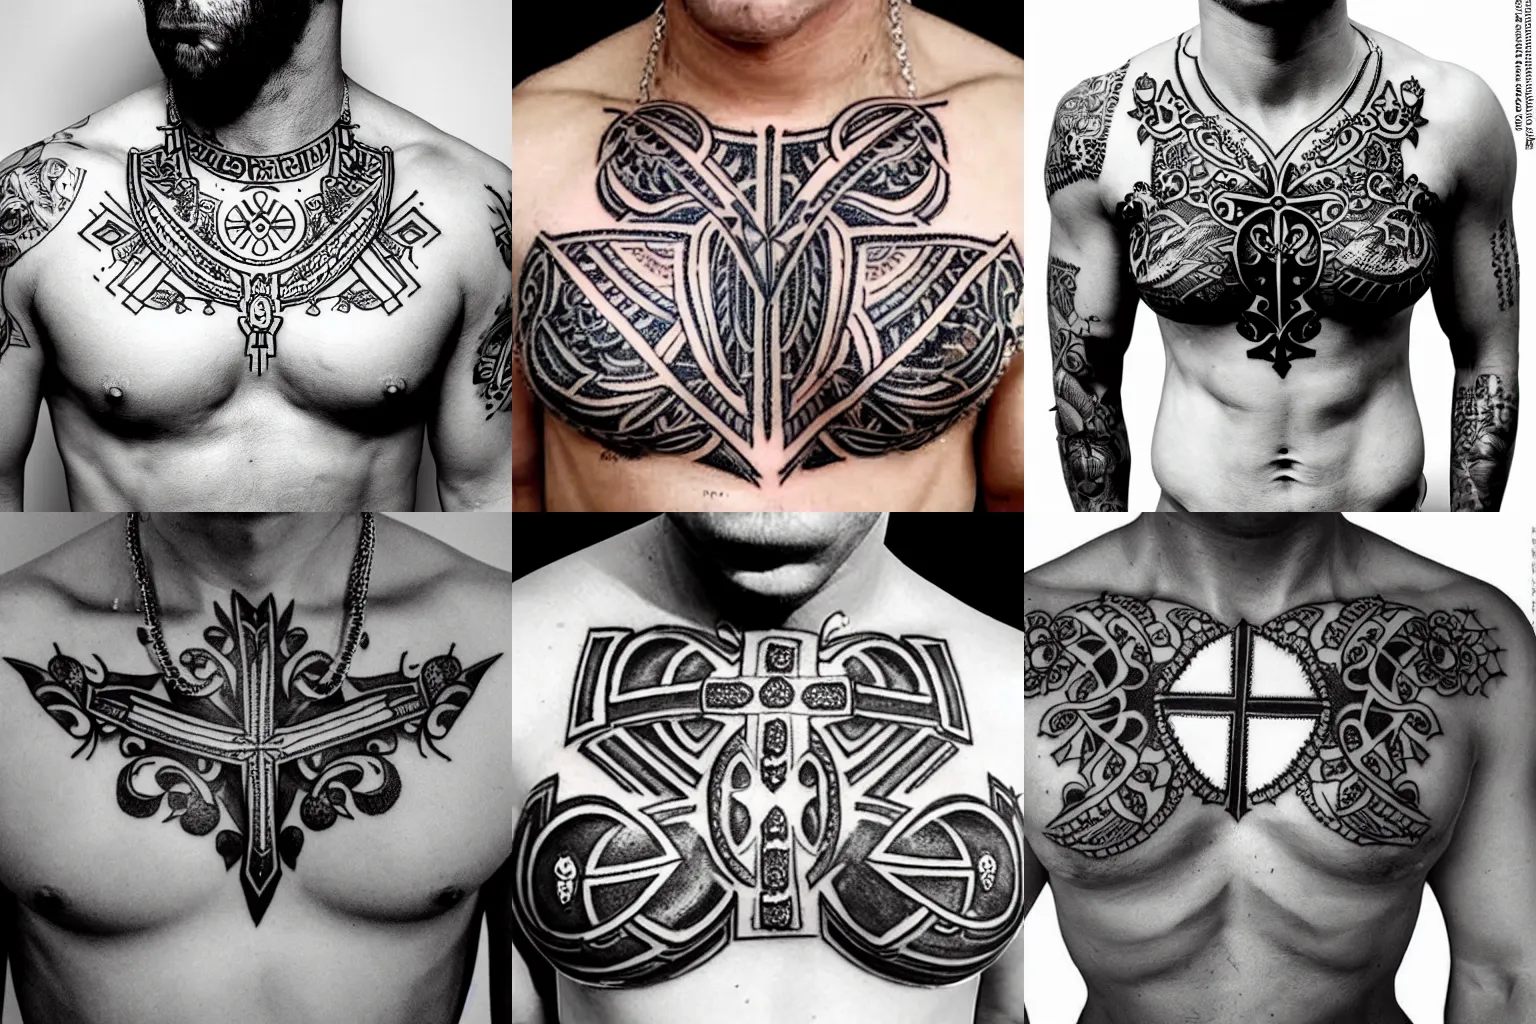 Prompt: Black and white sketch, cross hatch, chest tattoo jewels ornate opulent